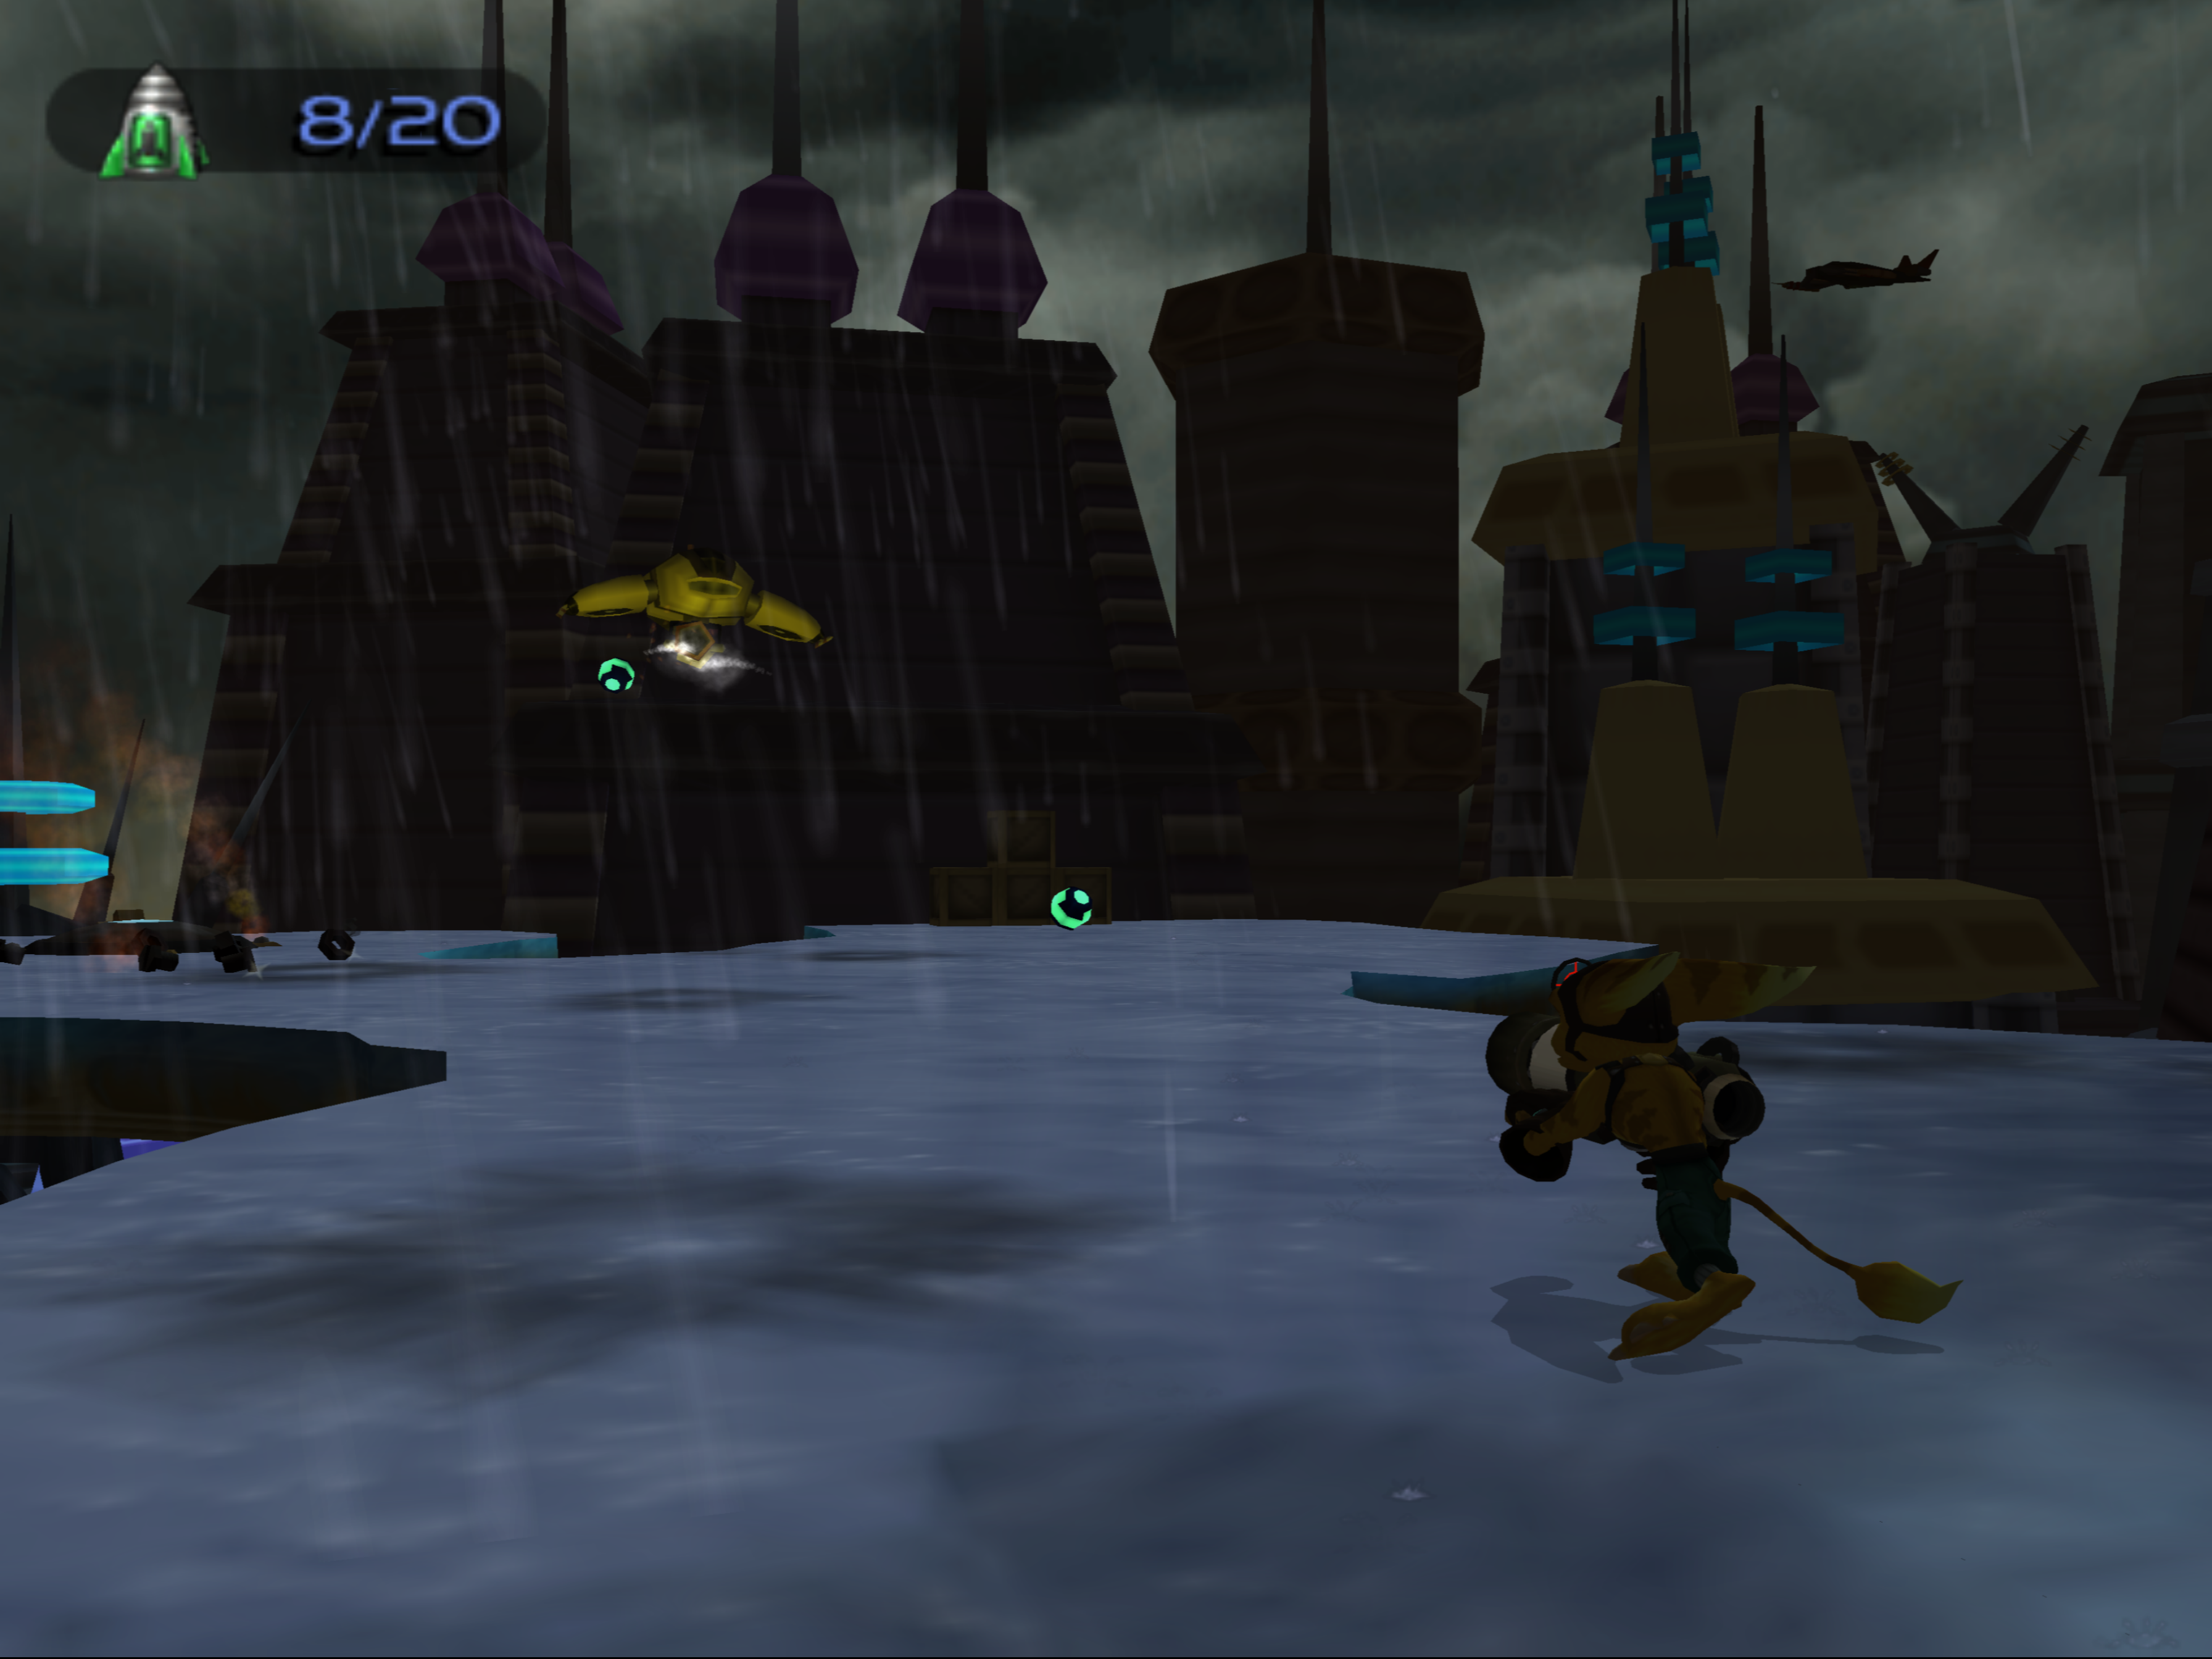 Ratchet & Clank PS2 Gameplay HD (PCSX2) 